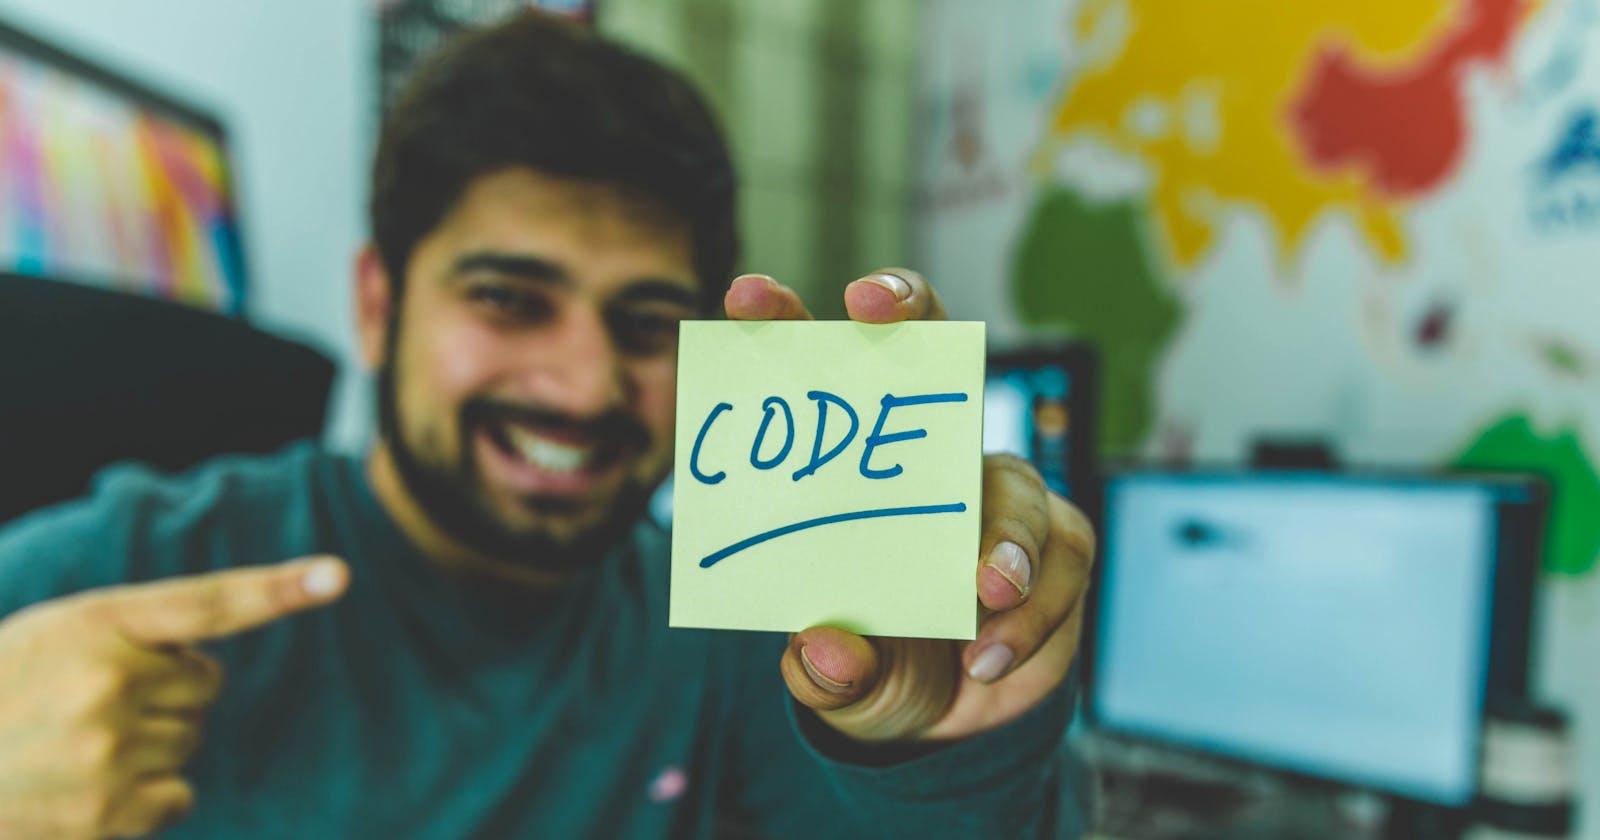 The Accident of Code – How I became a programmer